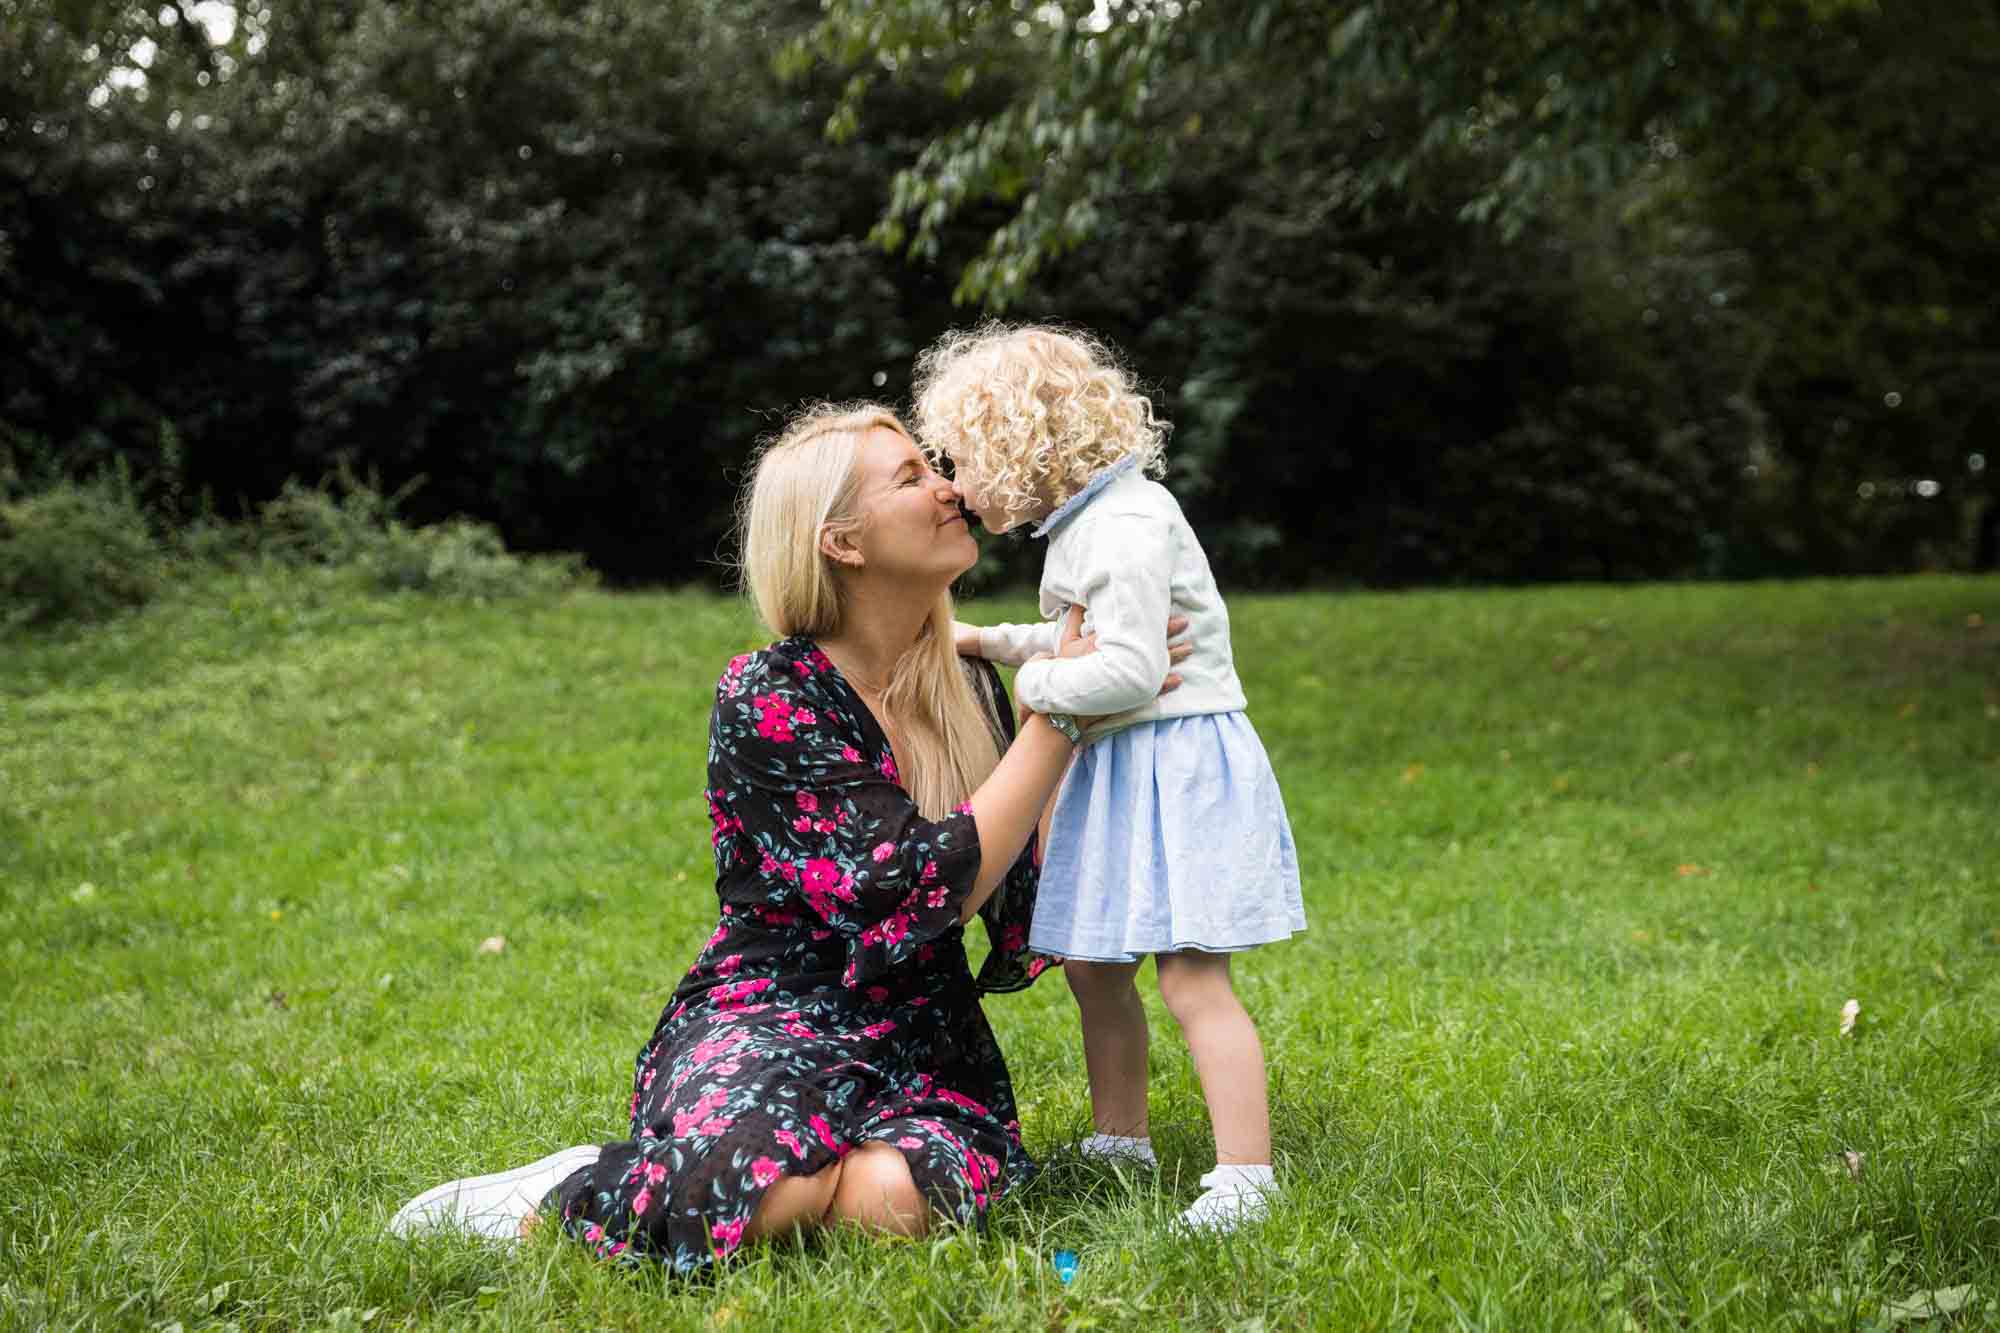 Central Park family portrait of mother and little girl touching noses in grass